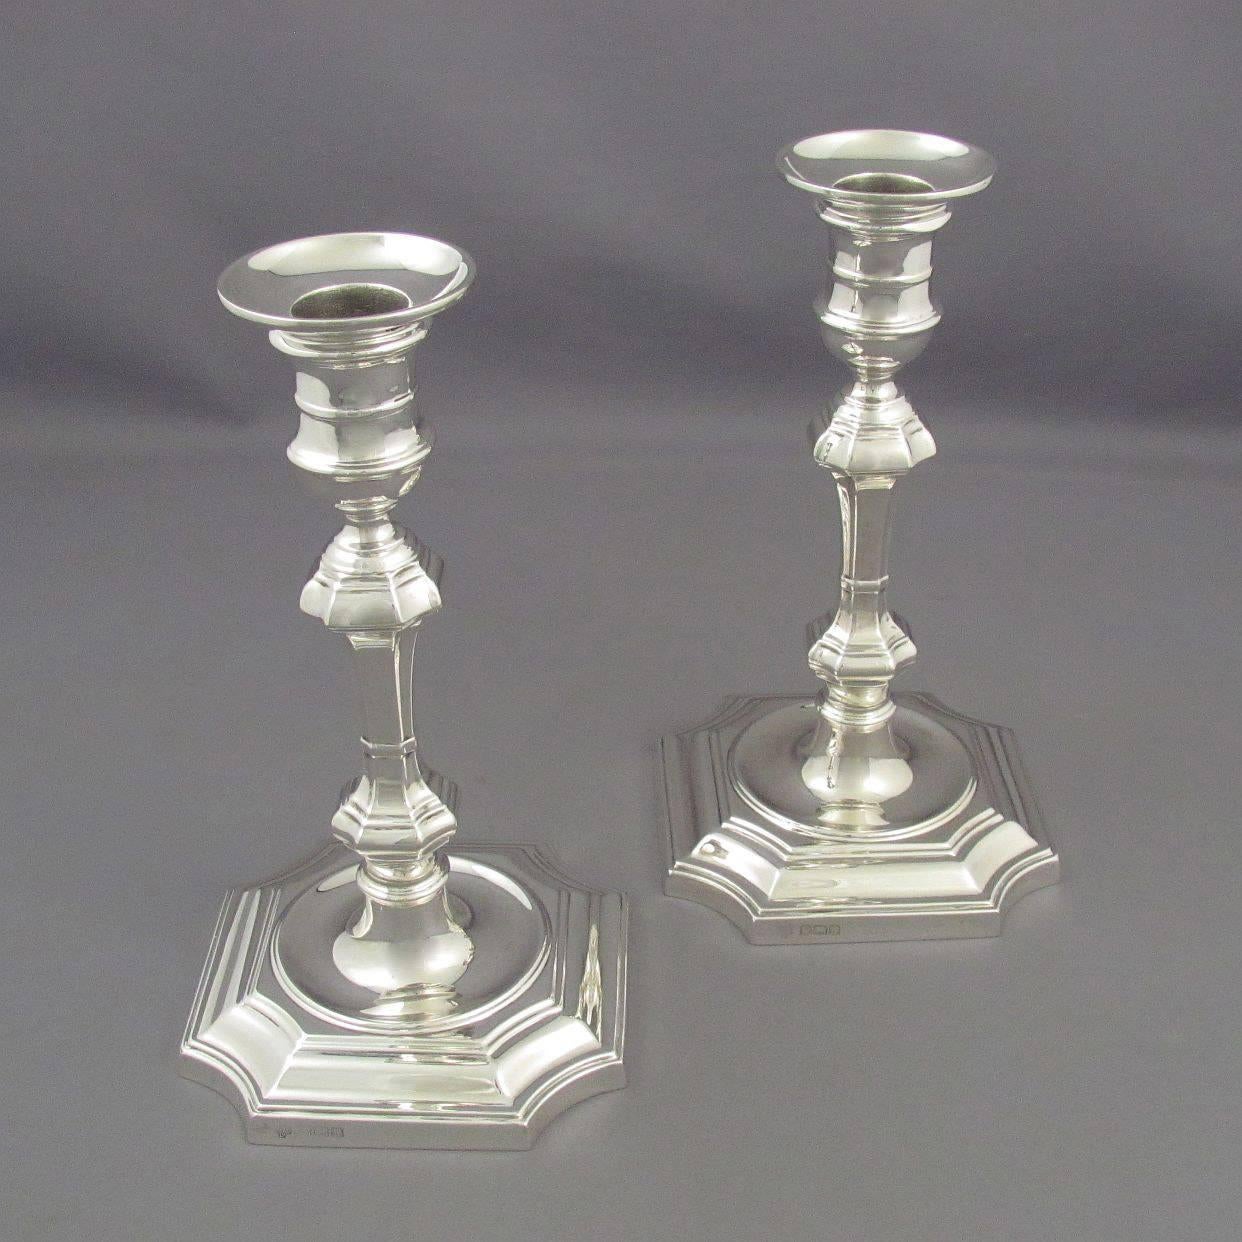 A pair of English sterling silver candlesticks by Hawksworth Eyre & Co., hallmarked Sheffield, 1922. In the George I style, each on stepped square base with incurved corners, double knopped stem and capstan shaped sconce. Retail mark of Ryrie